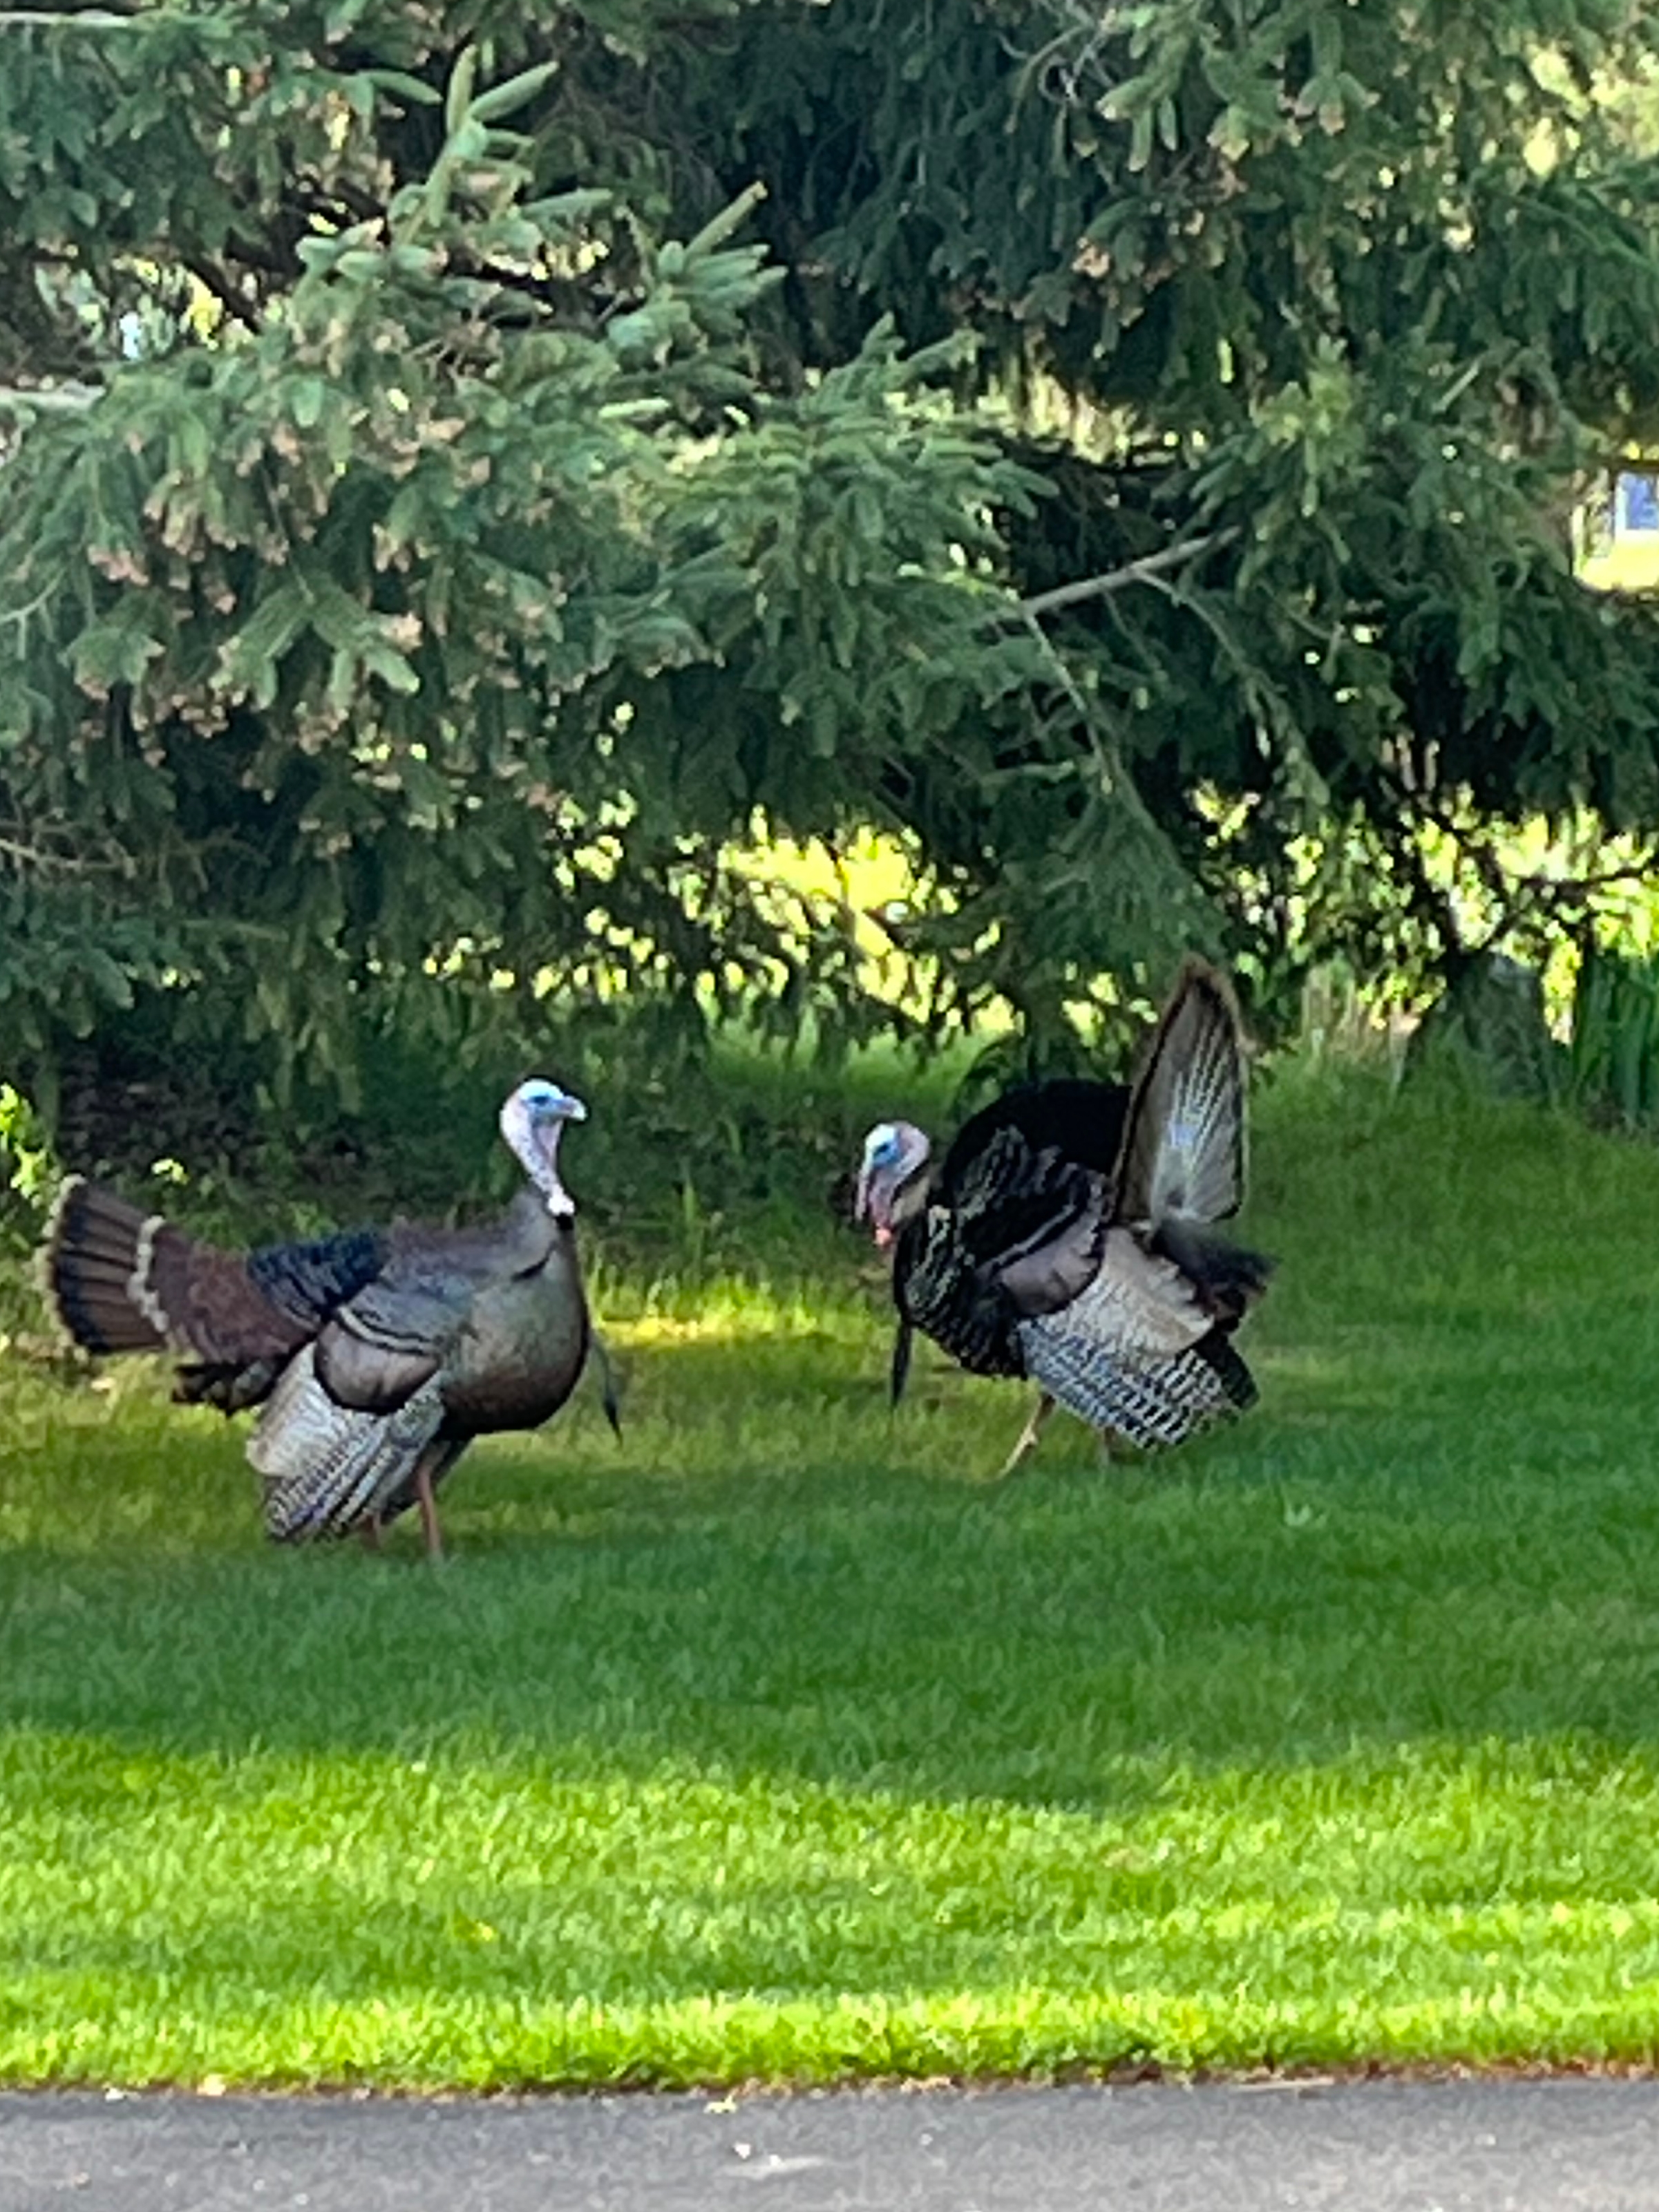 In our yard near Remus this morning. 